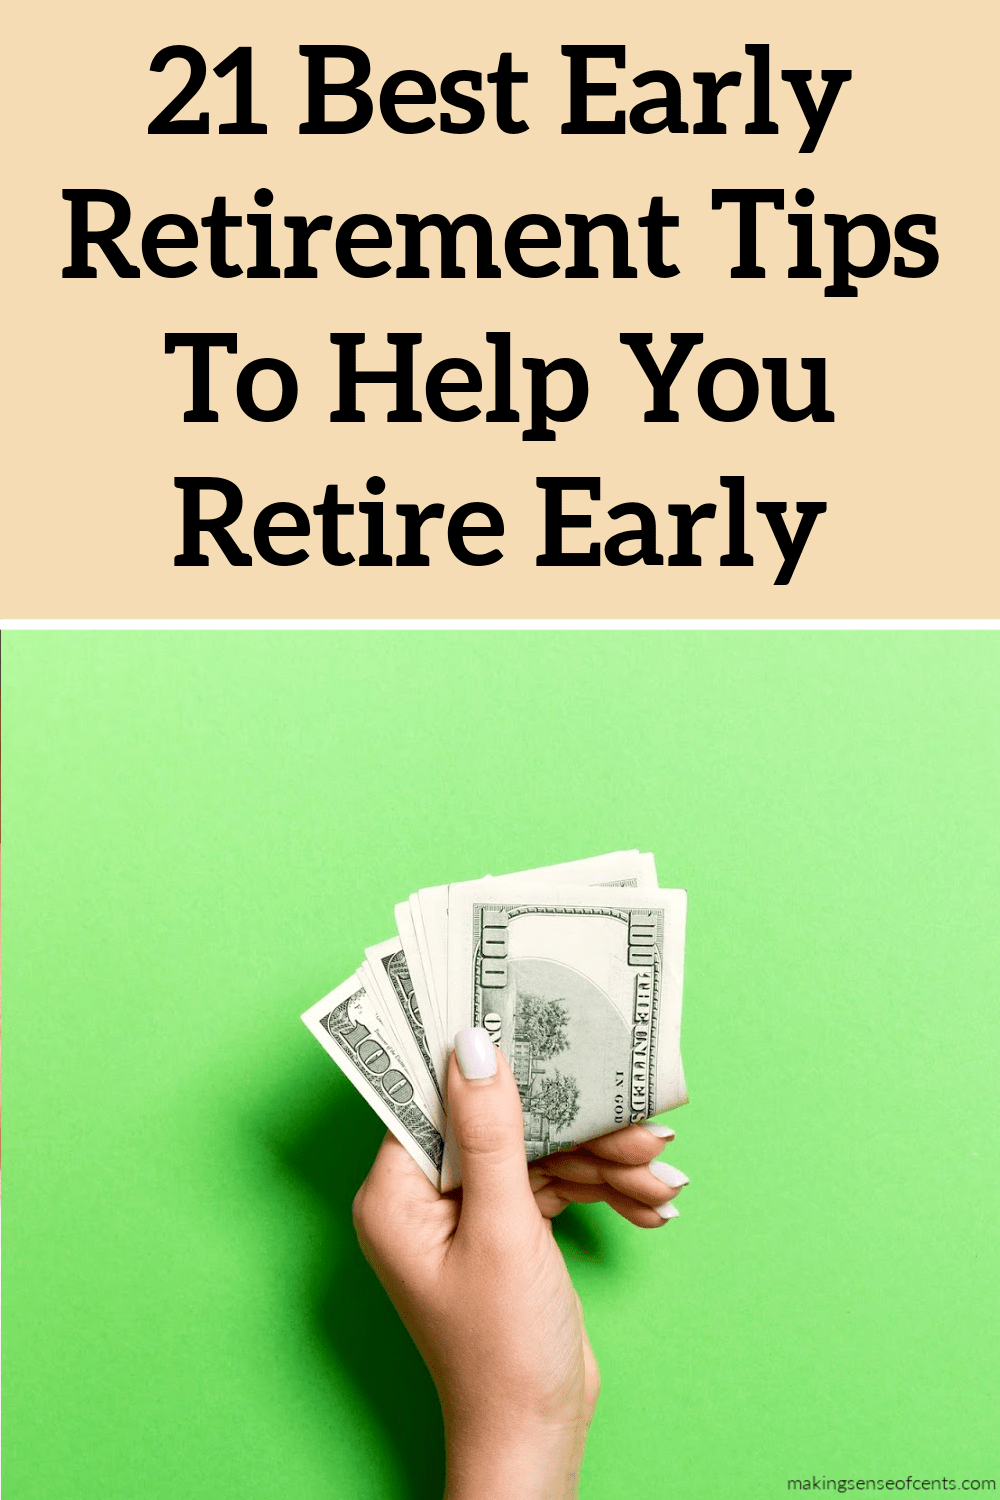 21 Best Early Retirement Tips To Help You Retire Early